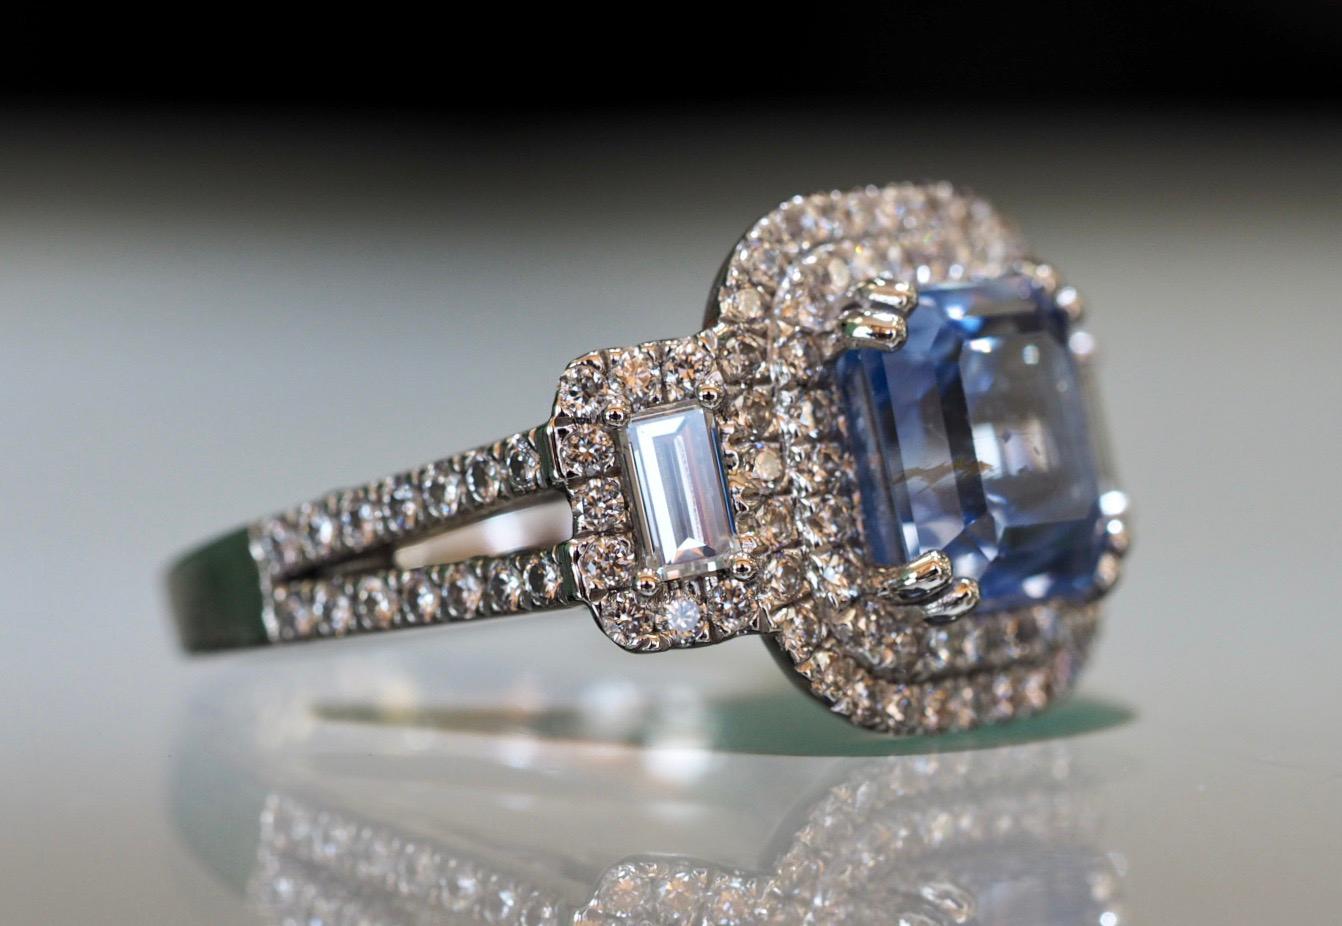 Brand new sapphire and diamond platinum ring has been custom designed and created to perfection by our magnificent team! It includes a 4.00 carat  octagonal step-cut natural 